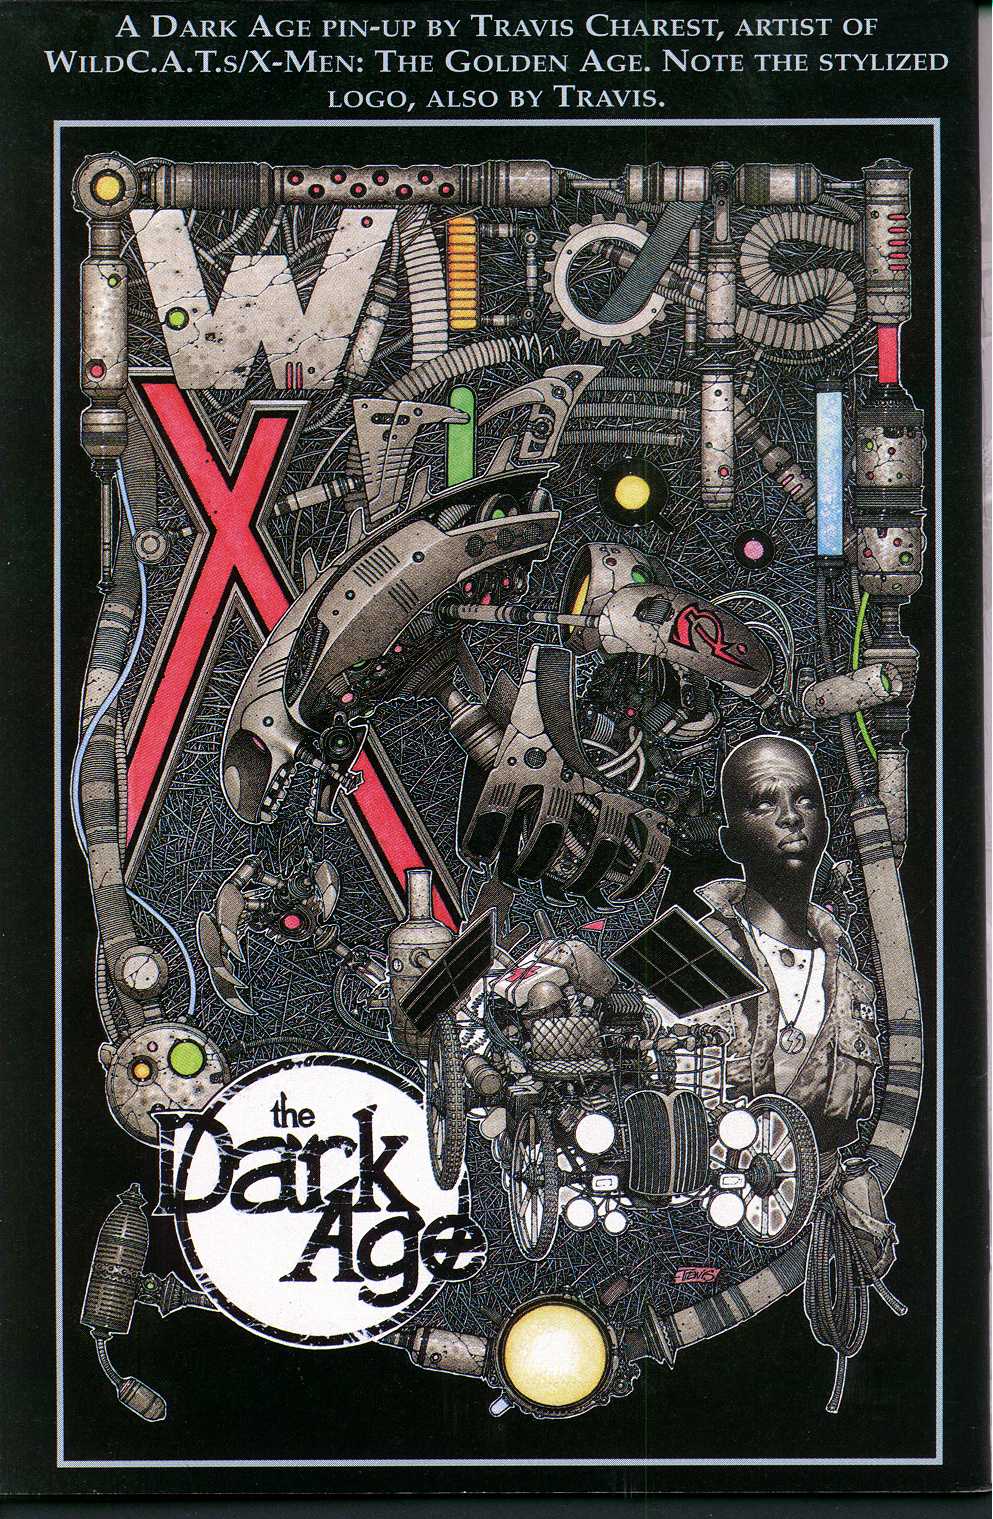 Read online WildC.A.T.S/X-Men: The Dark Age comic -  Issue # Full - 51